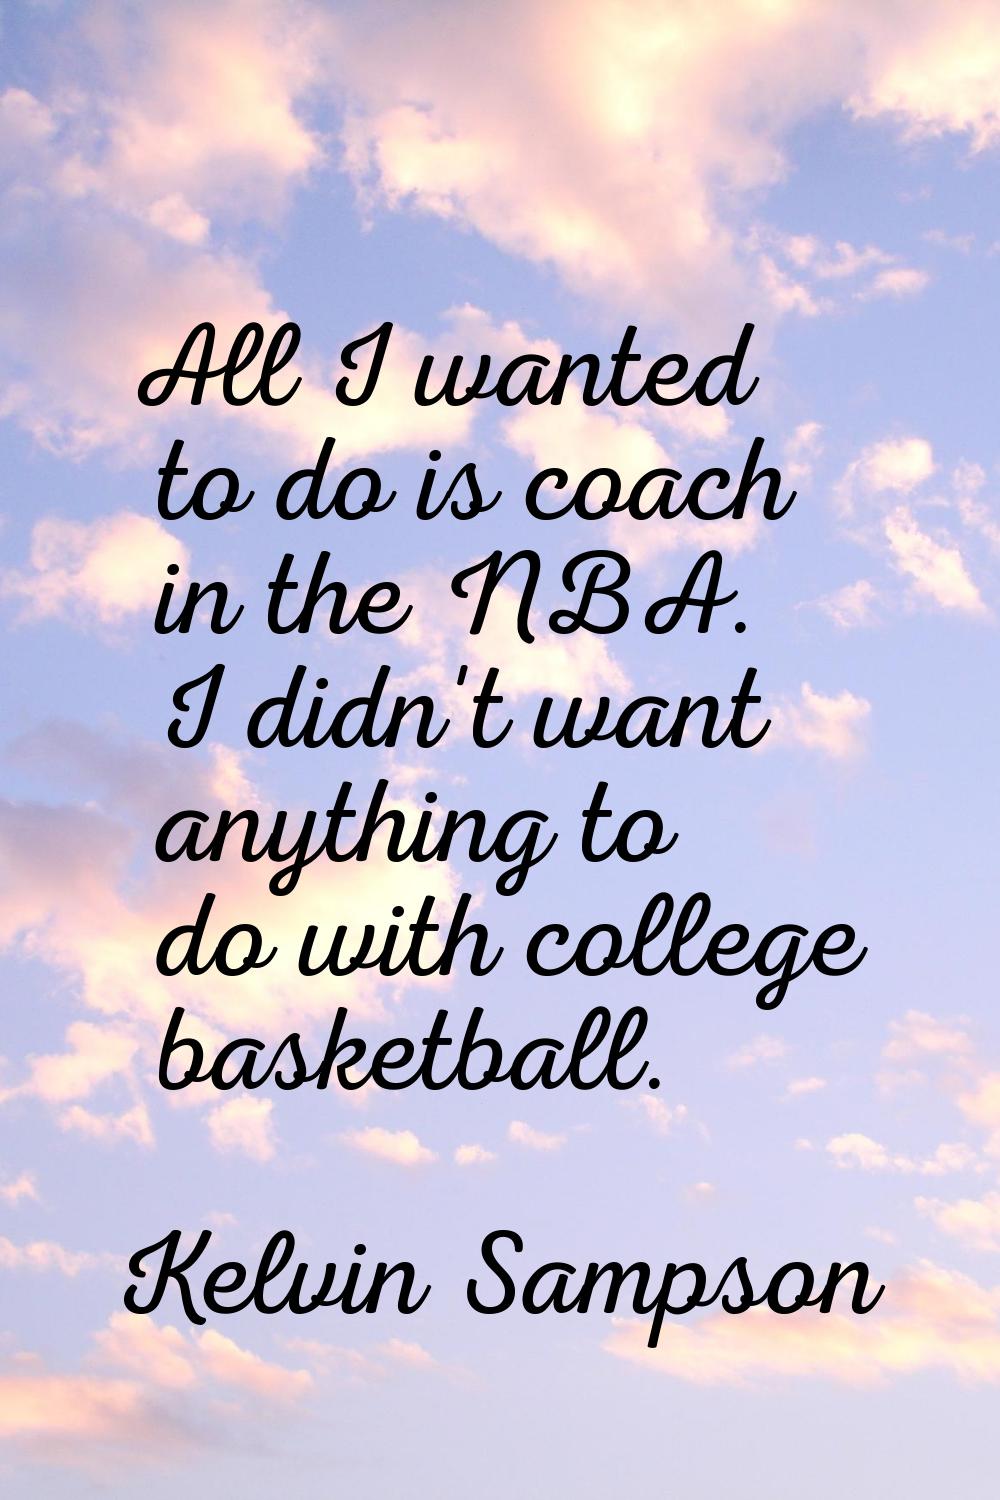 All I wanted to do is coach in the NBA. I didn't want anything to do with college basketball.